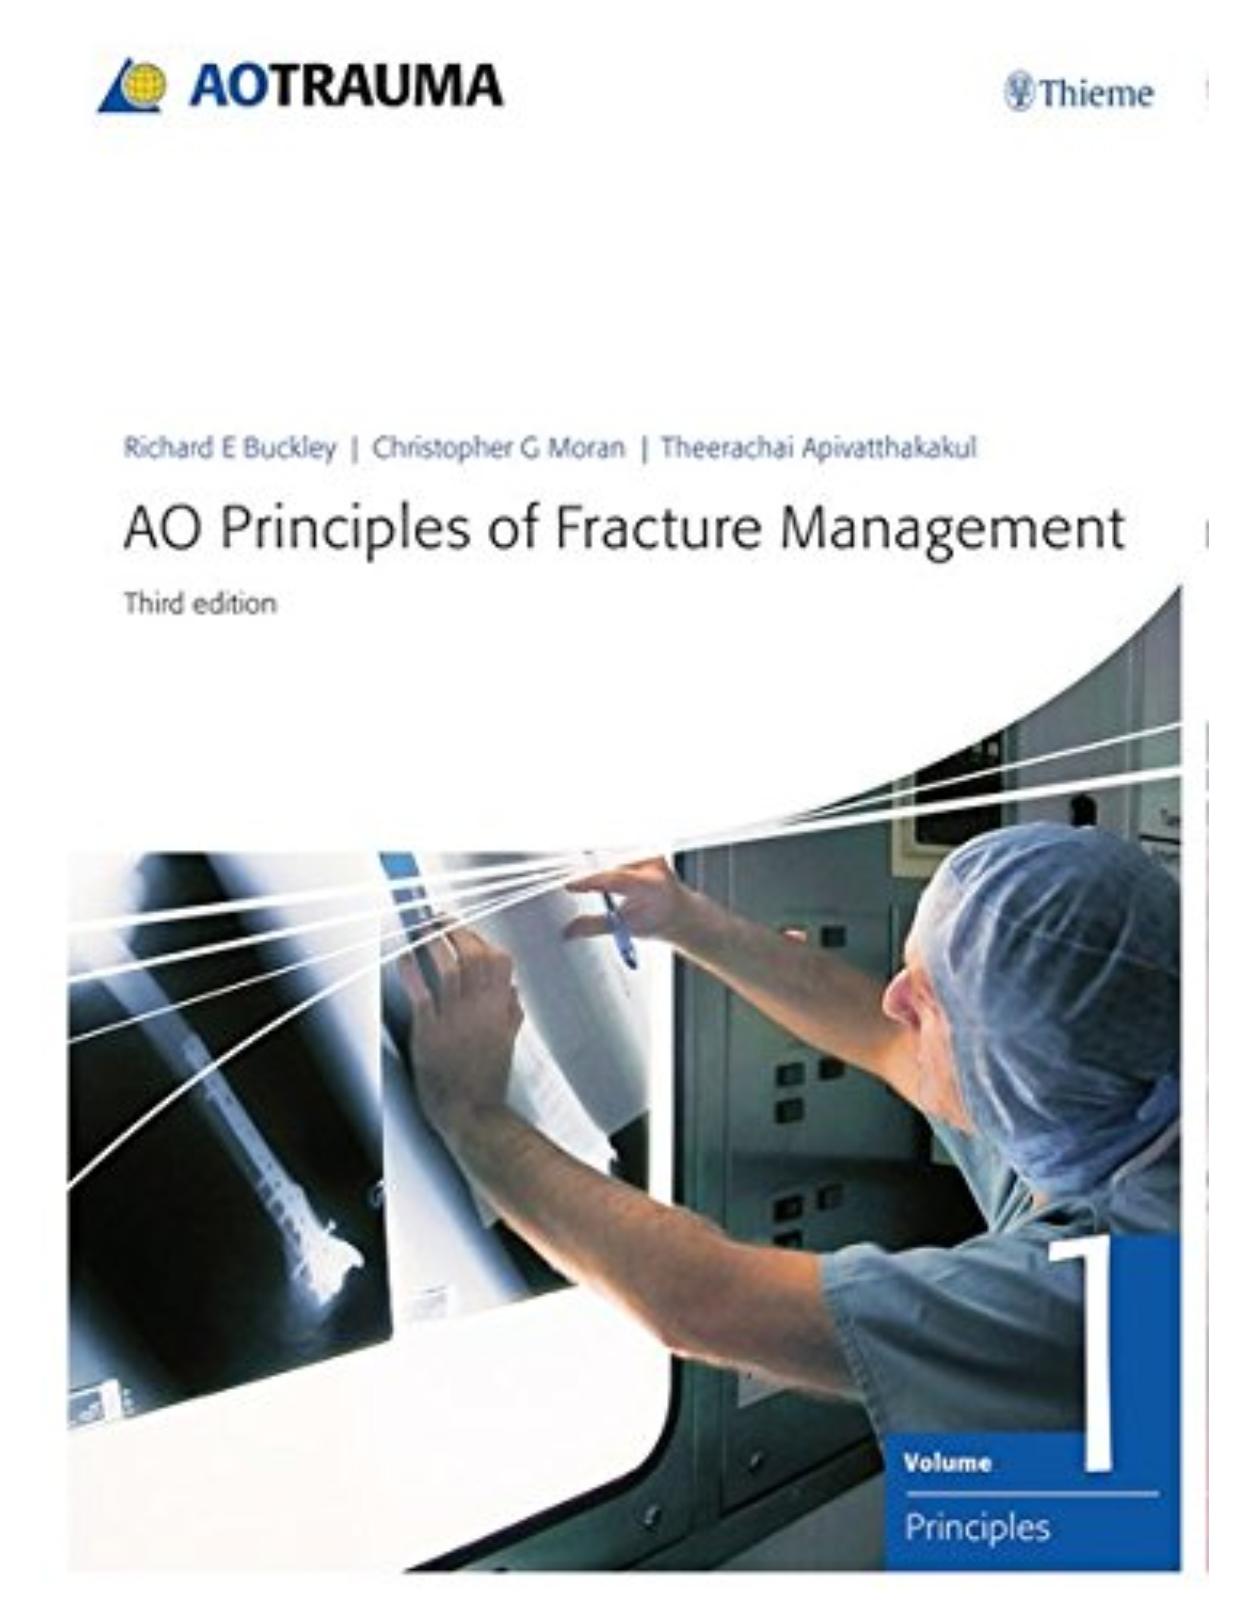  AO Principles of Fracture Management